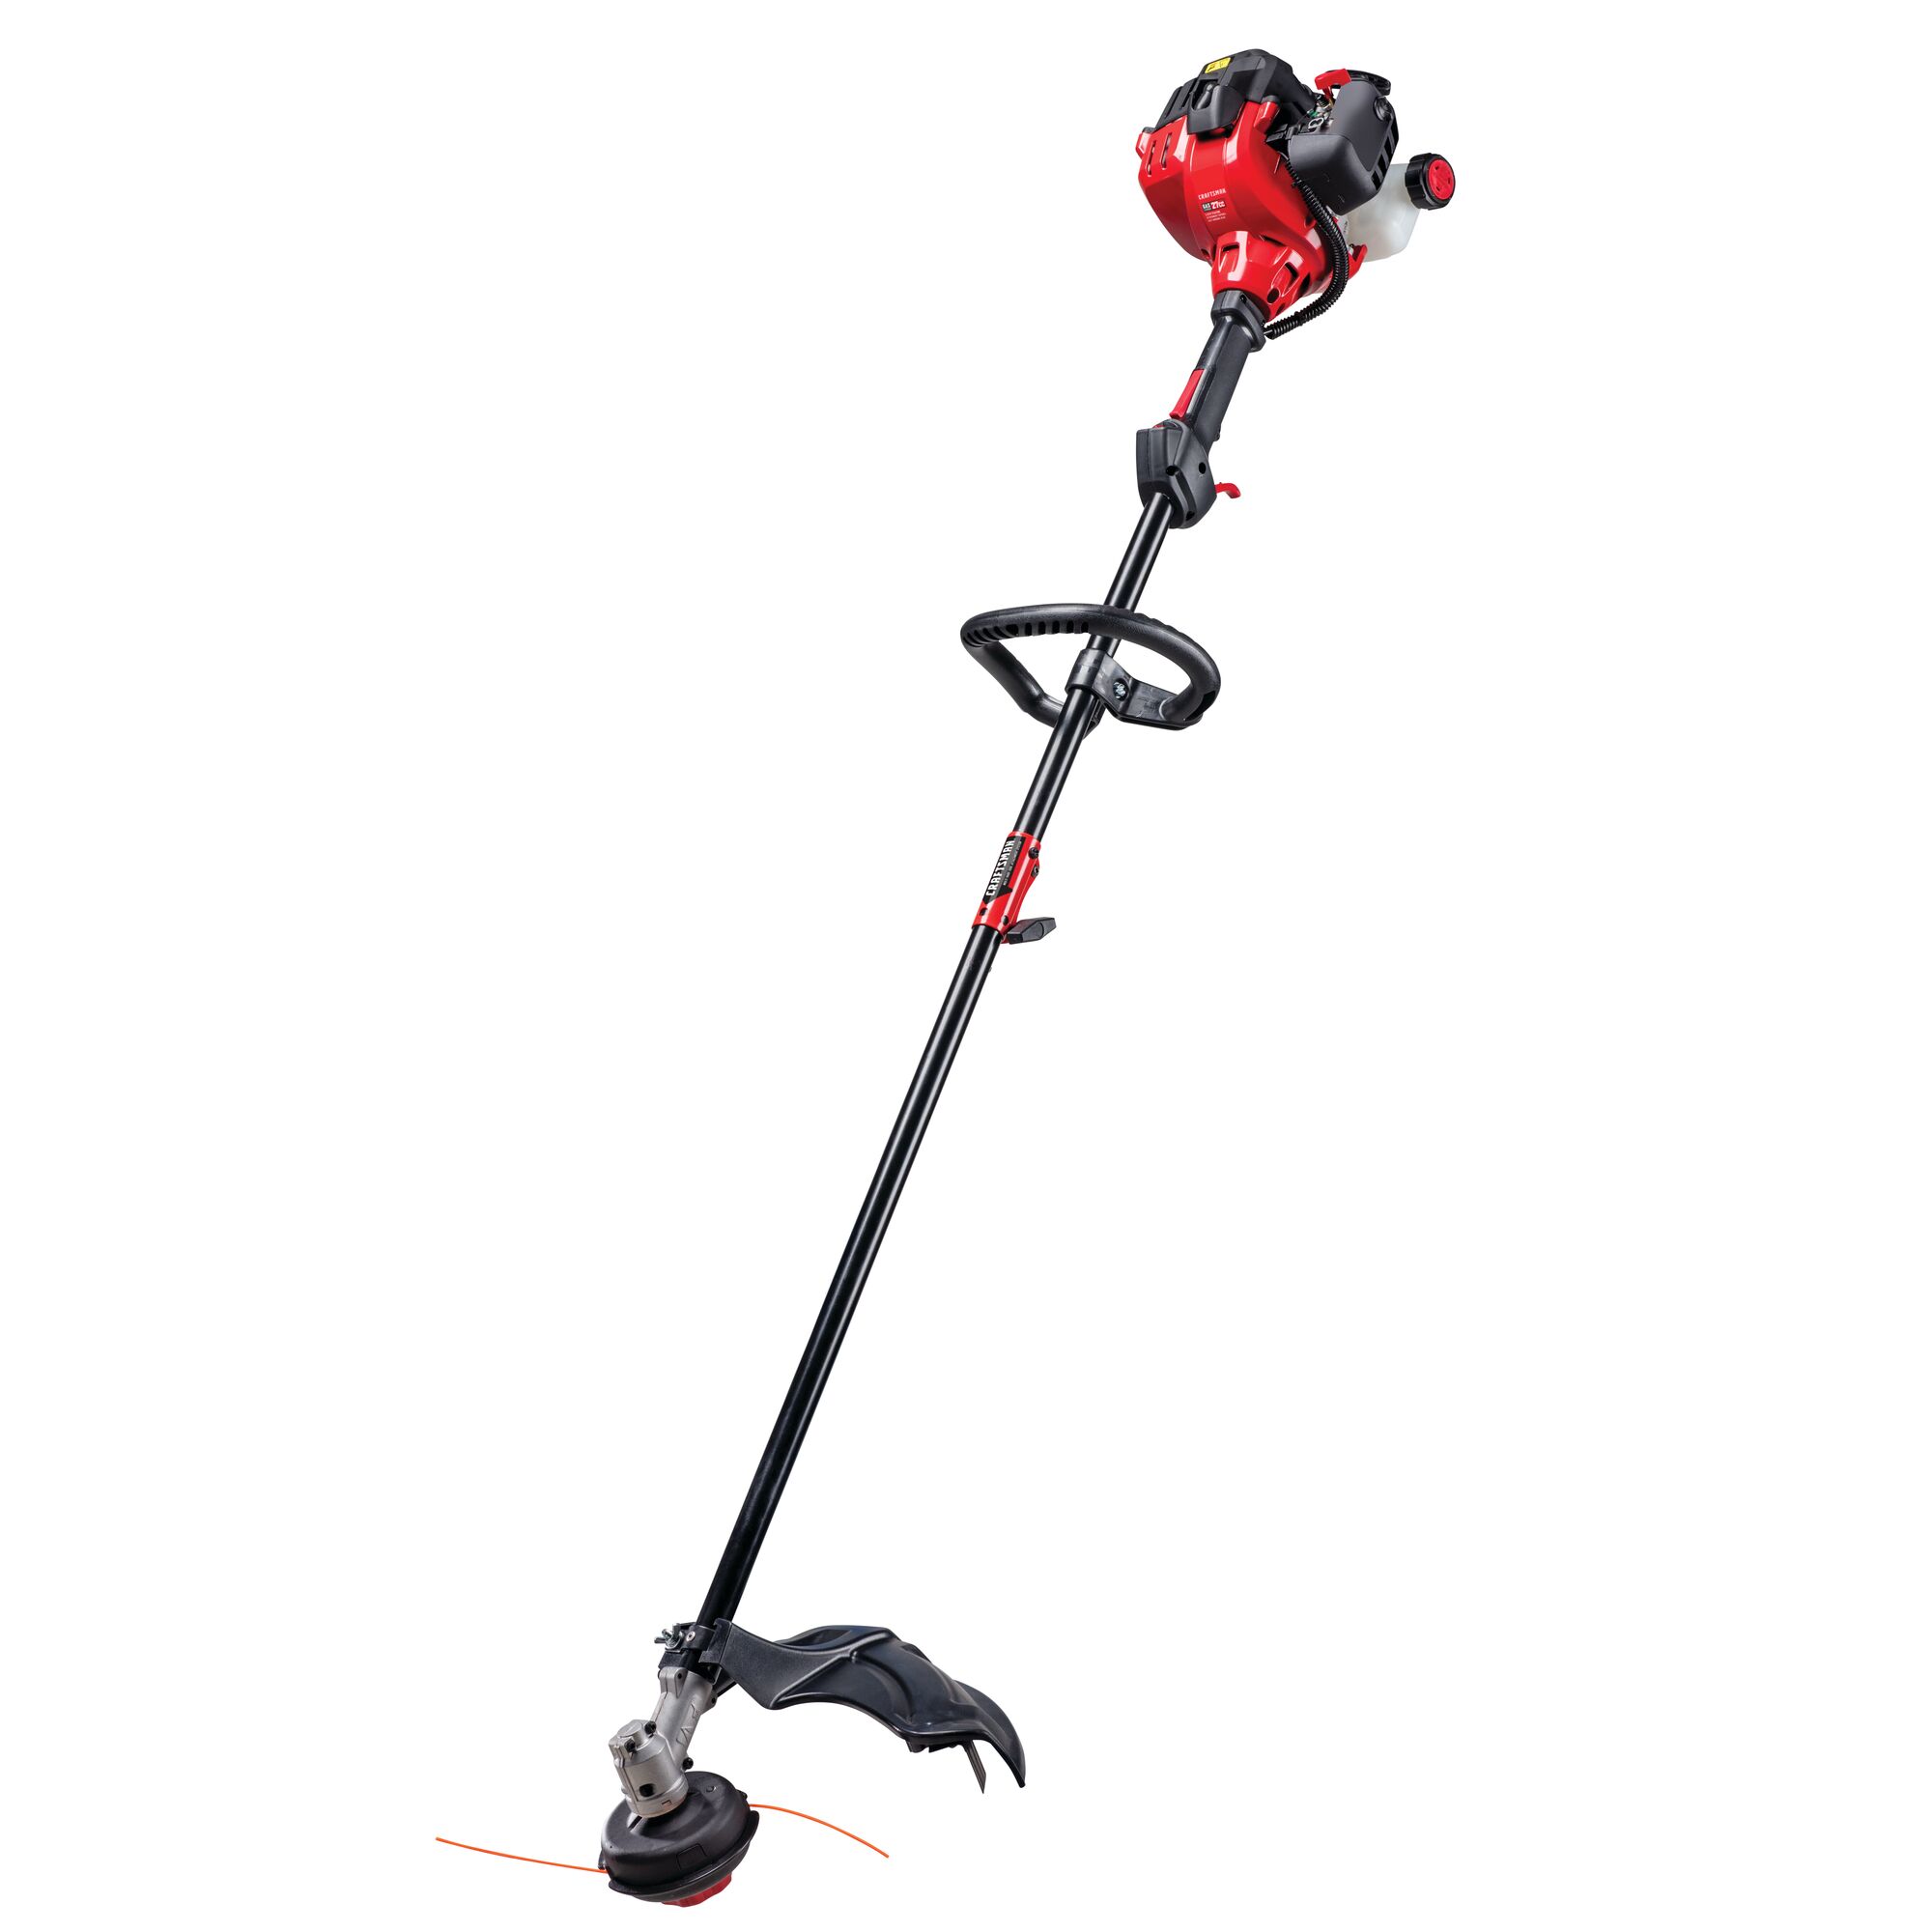 Right profile of 17 inch 2 Cycle straight shaft gas weedwacker string trimmer with attachment capability.